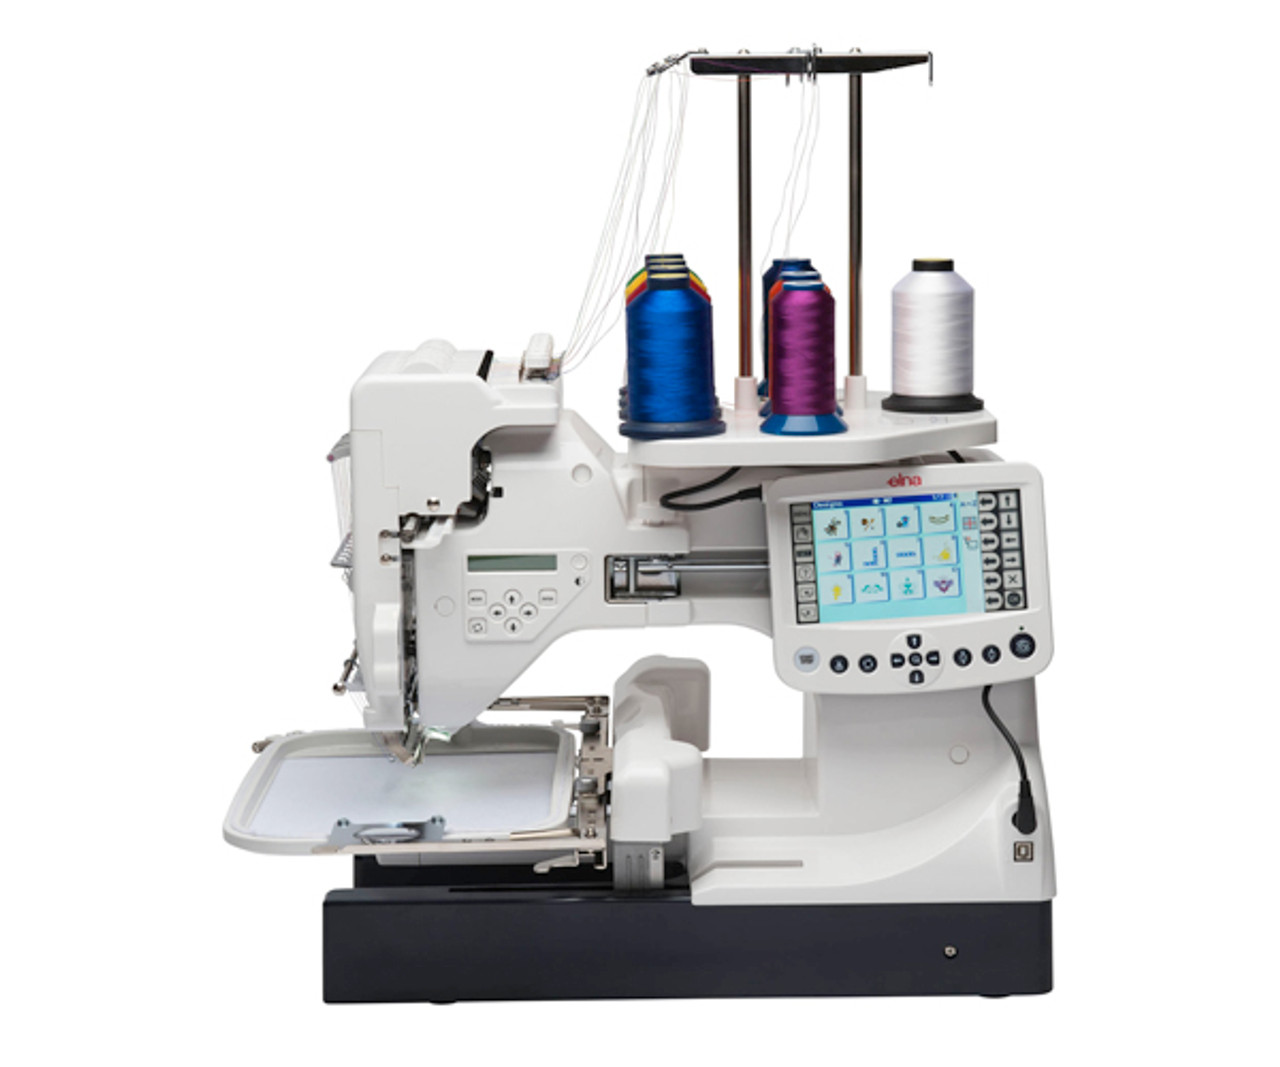 Elna eXpressive 850 Sewing And Embroidery Machine